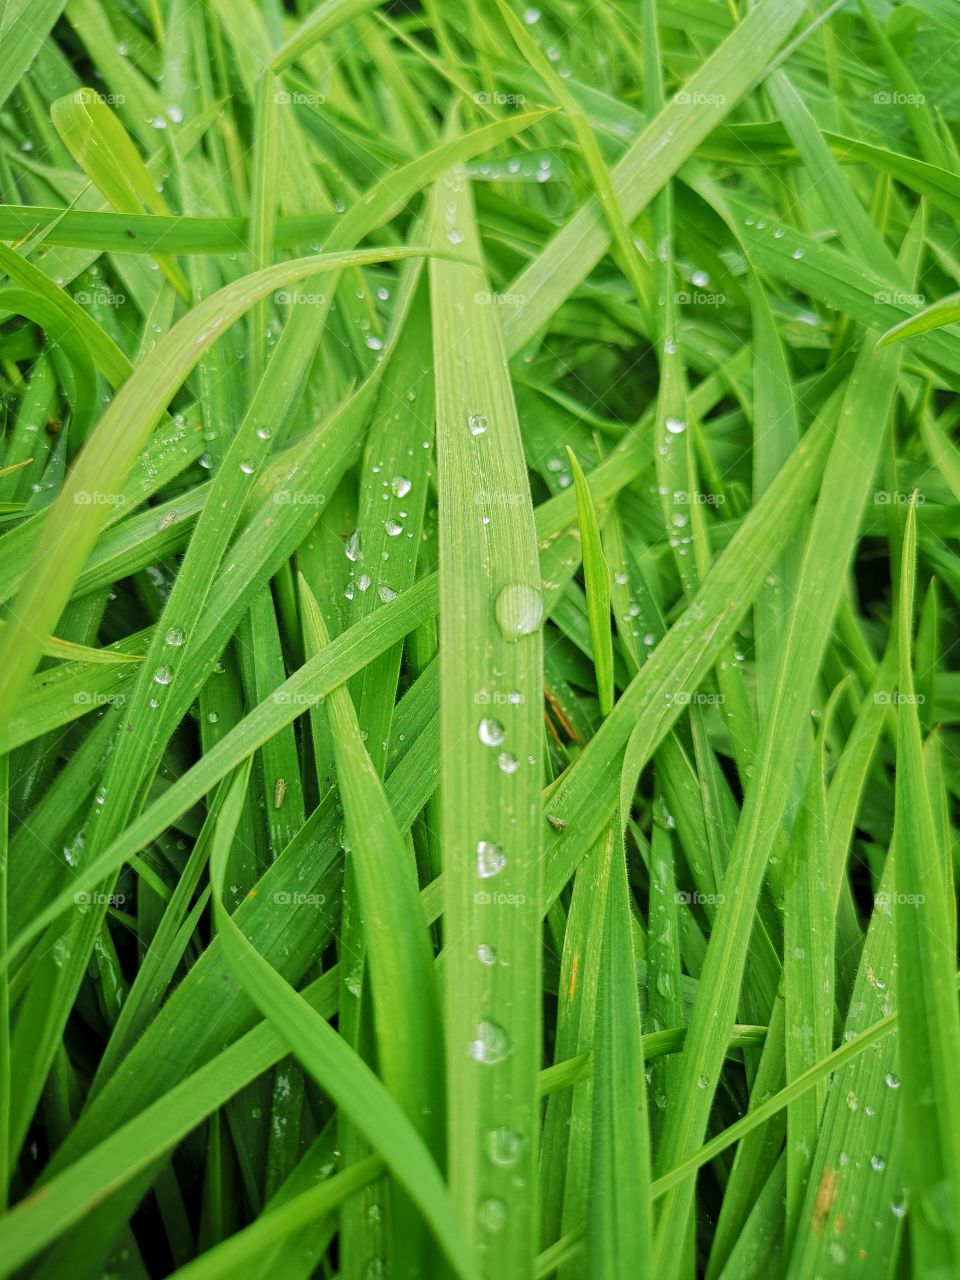 Grass with a drops